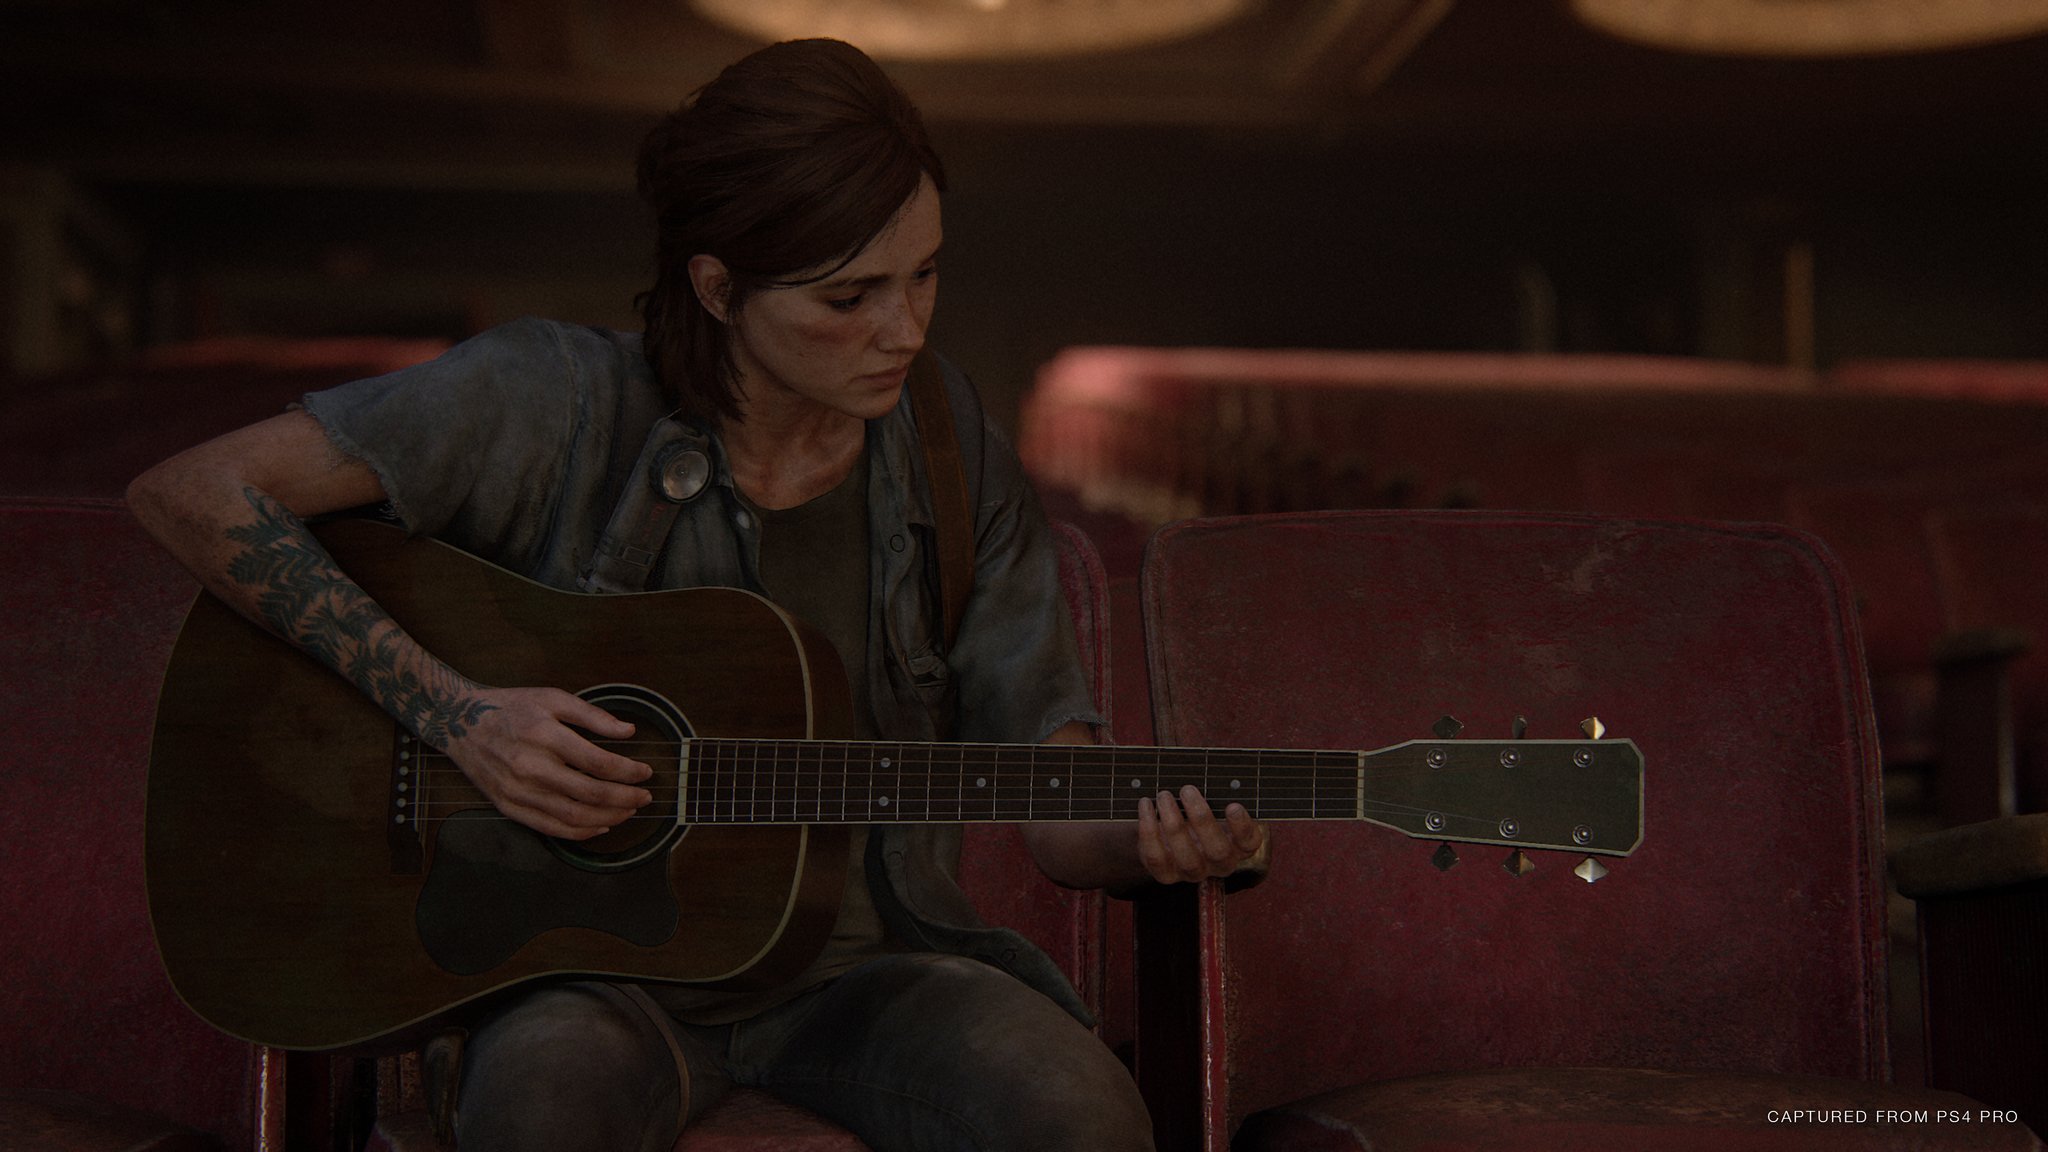 The Last of Us Part 2 PS4 Review: Cycle of Violence - TechSyndrome